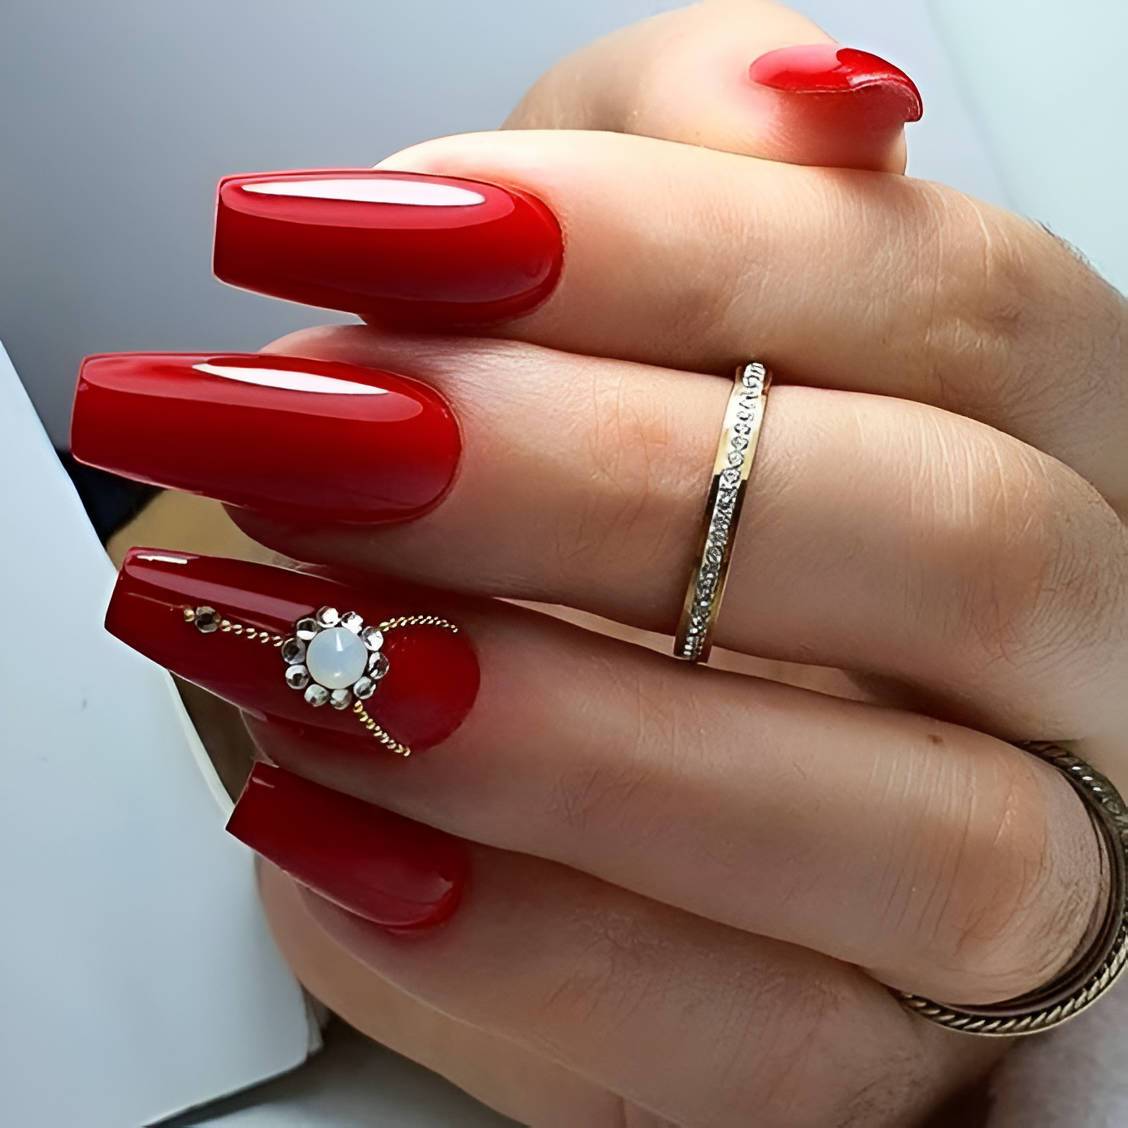 27 Glamorous Red Manicures To Make You Irresistible - 191